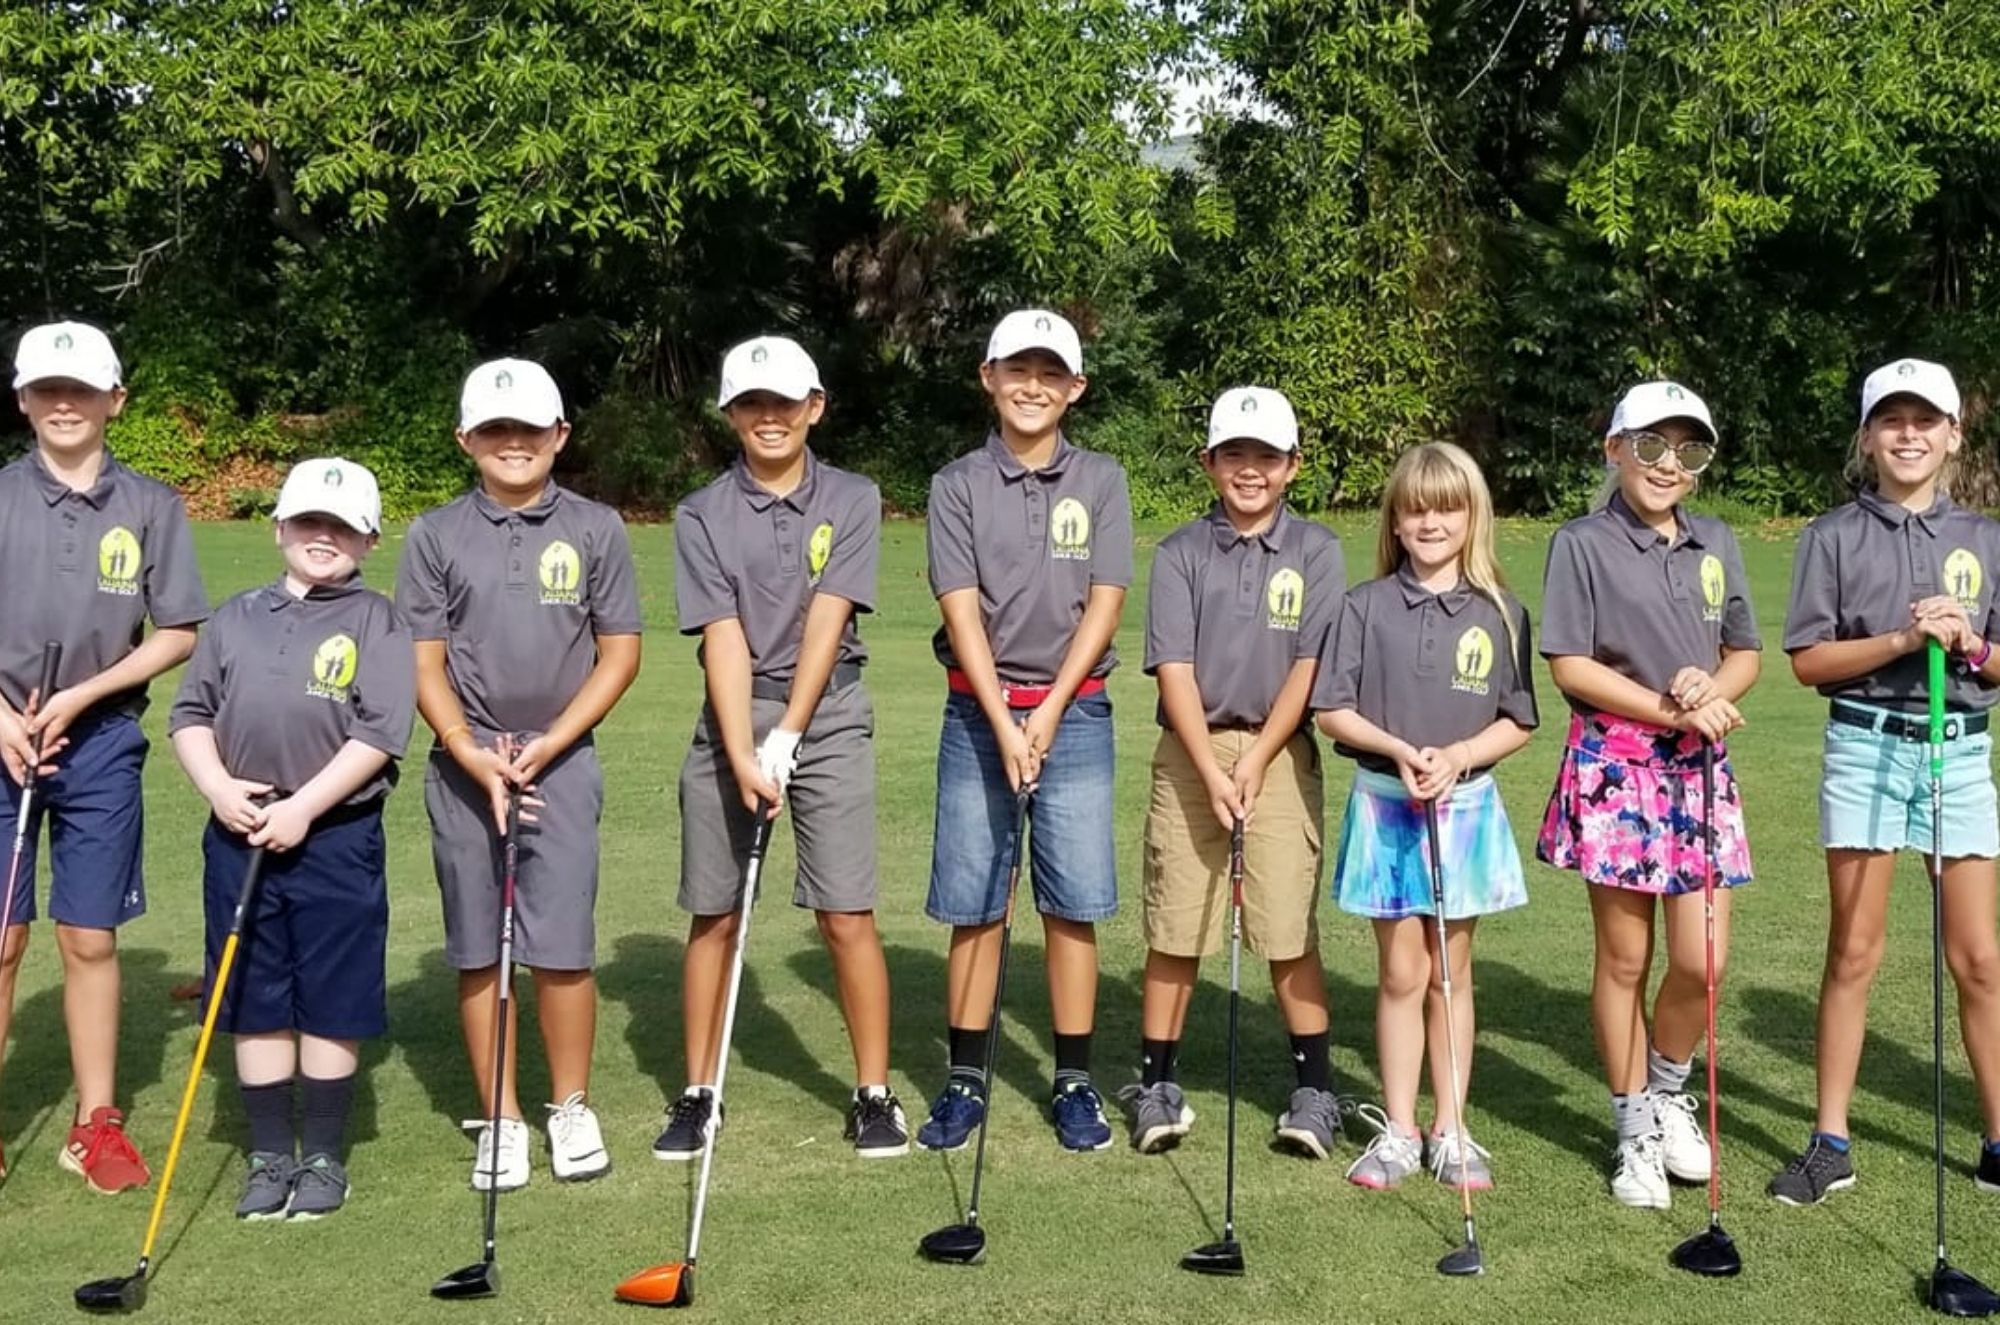 line up of children holding clubs